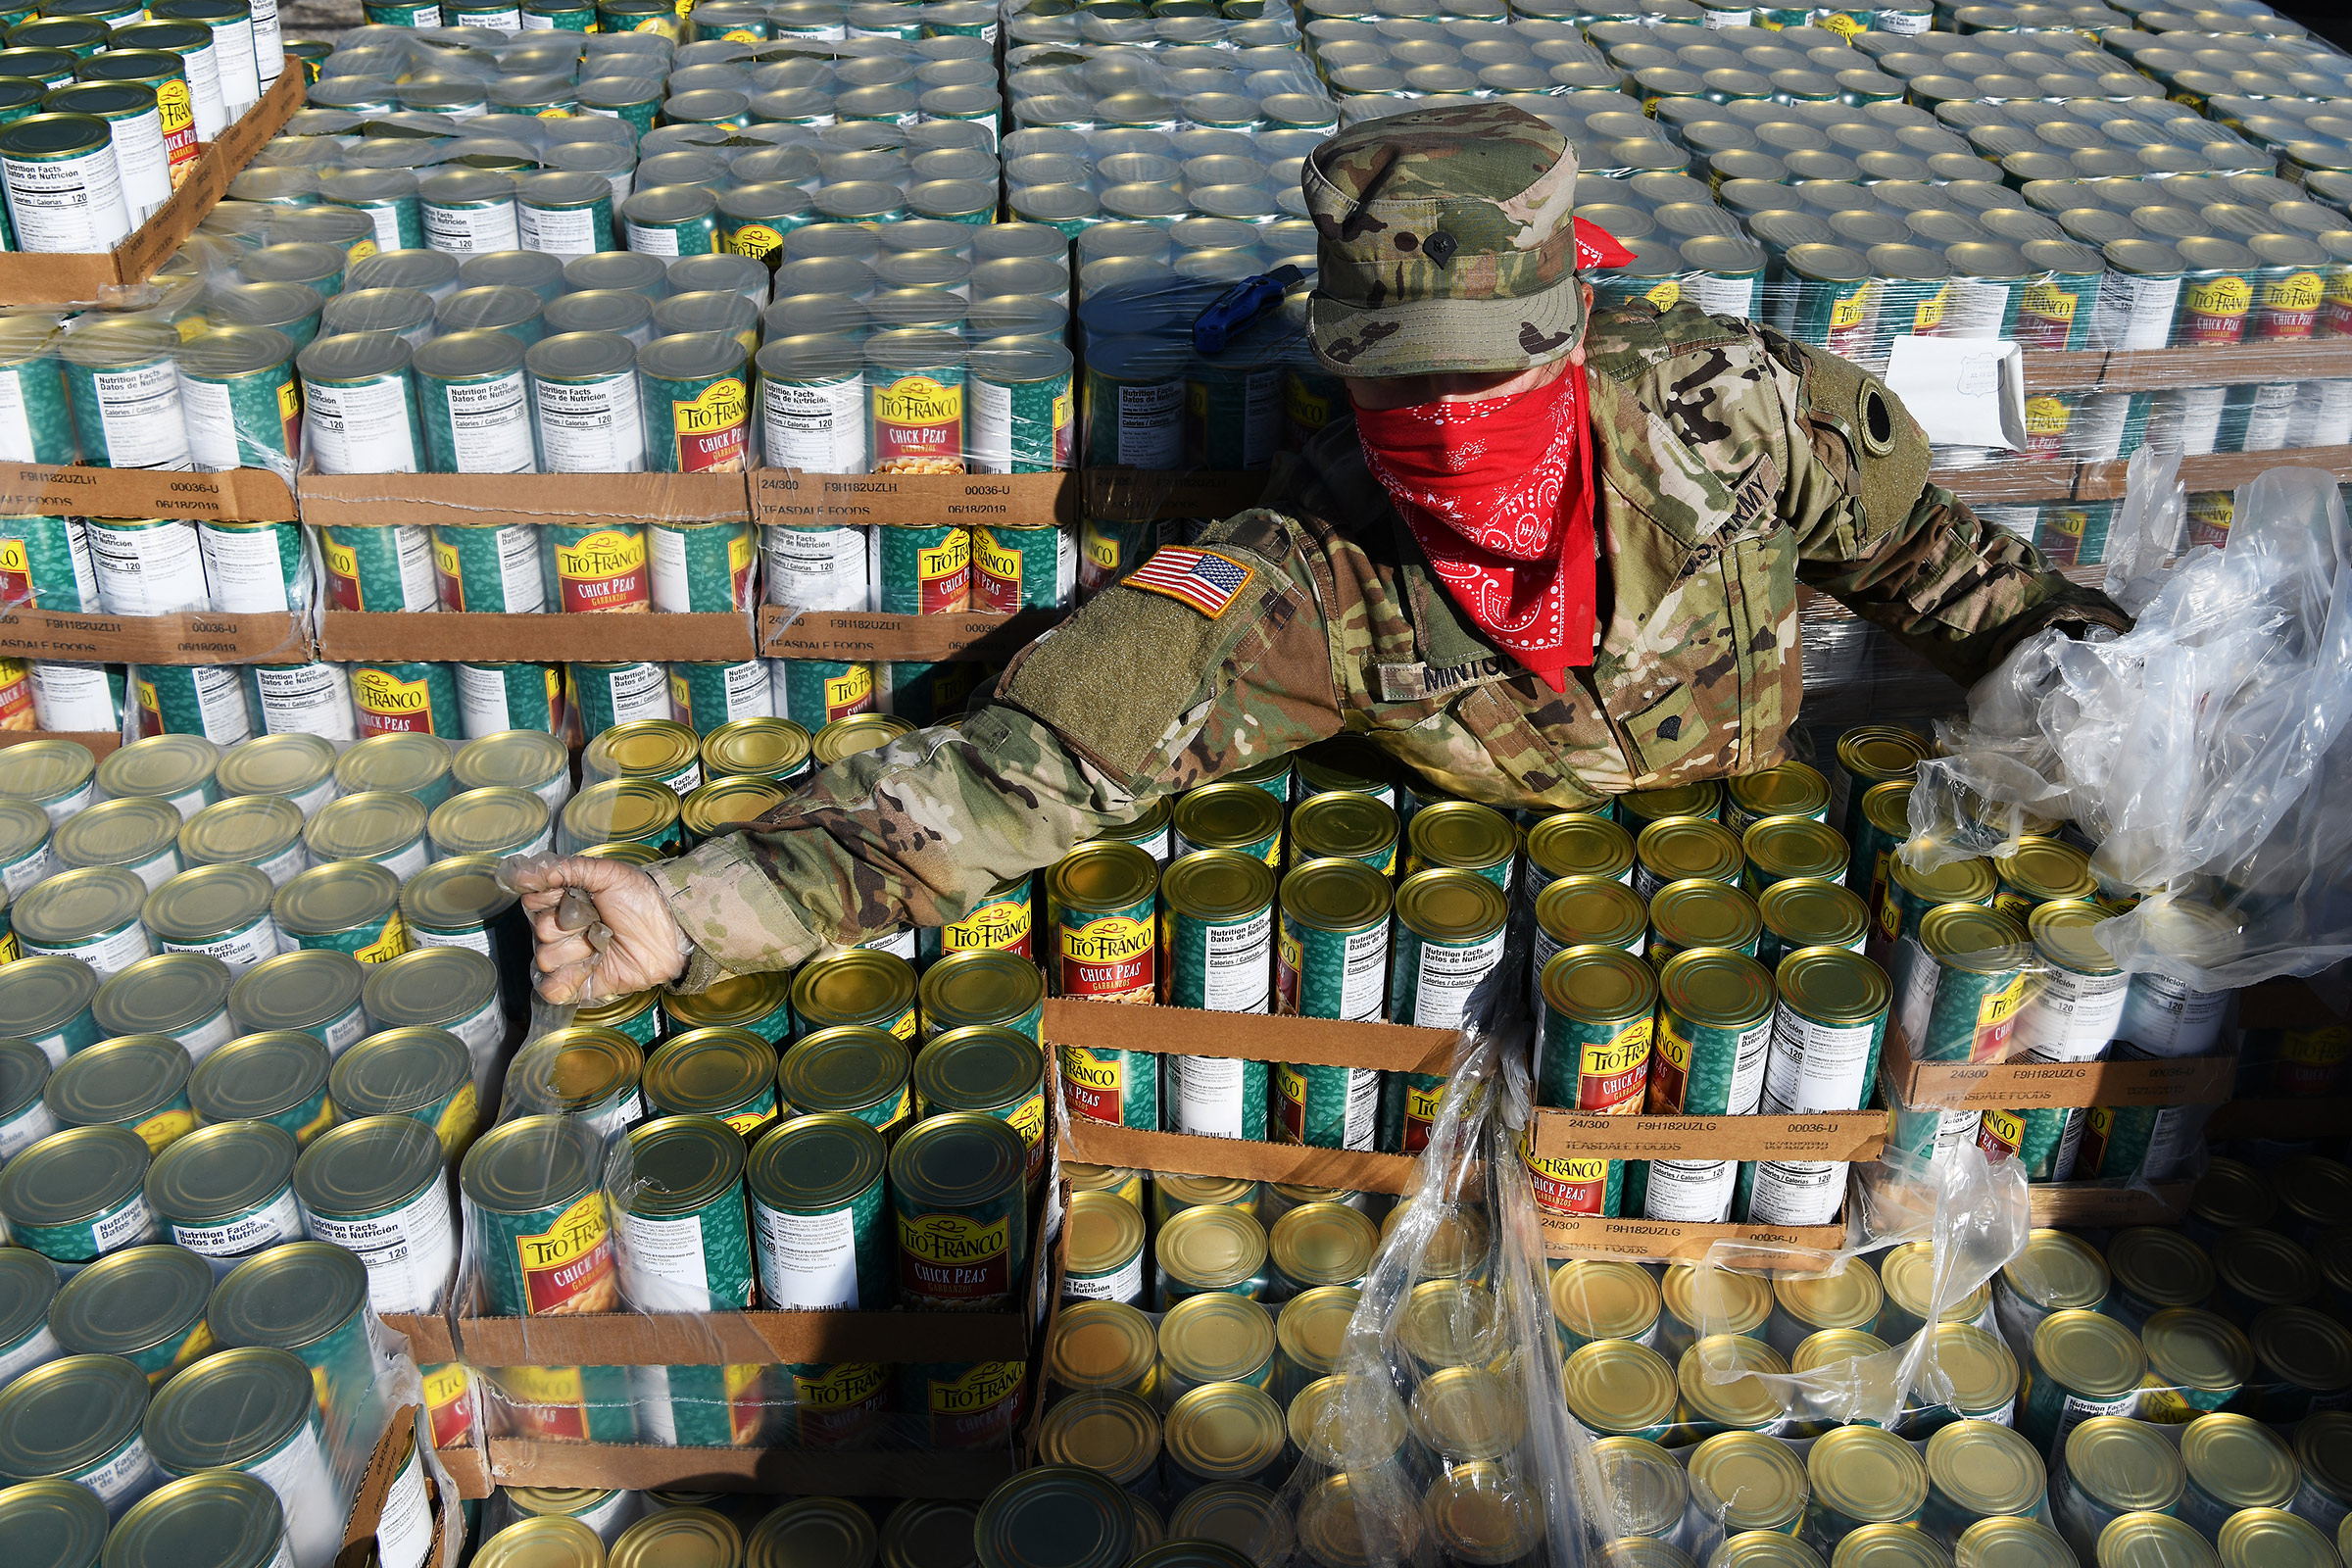 U.S. Army Spc. Rose Minton unpacks pallets of food at Wright State University's Nutter Center in Fairborn, Ohio, on April 21, 2020.